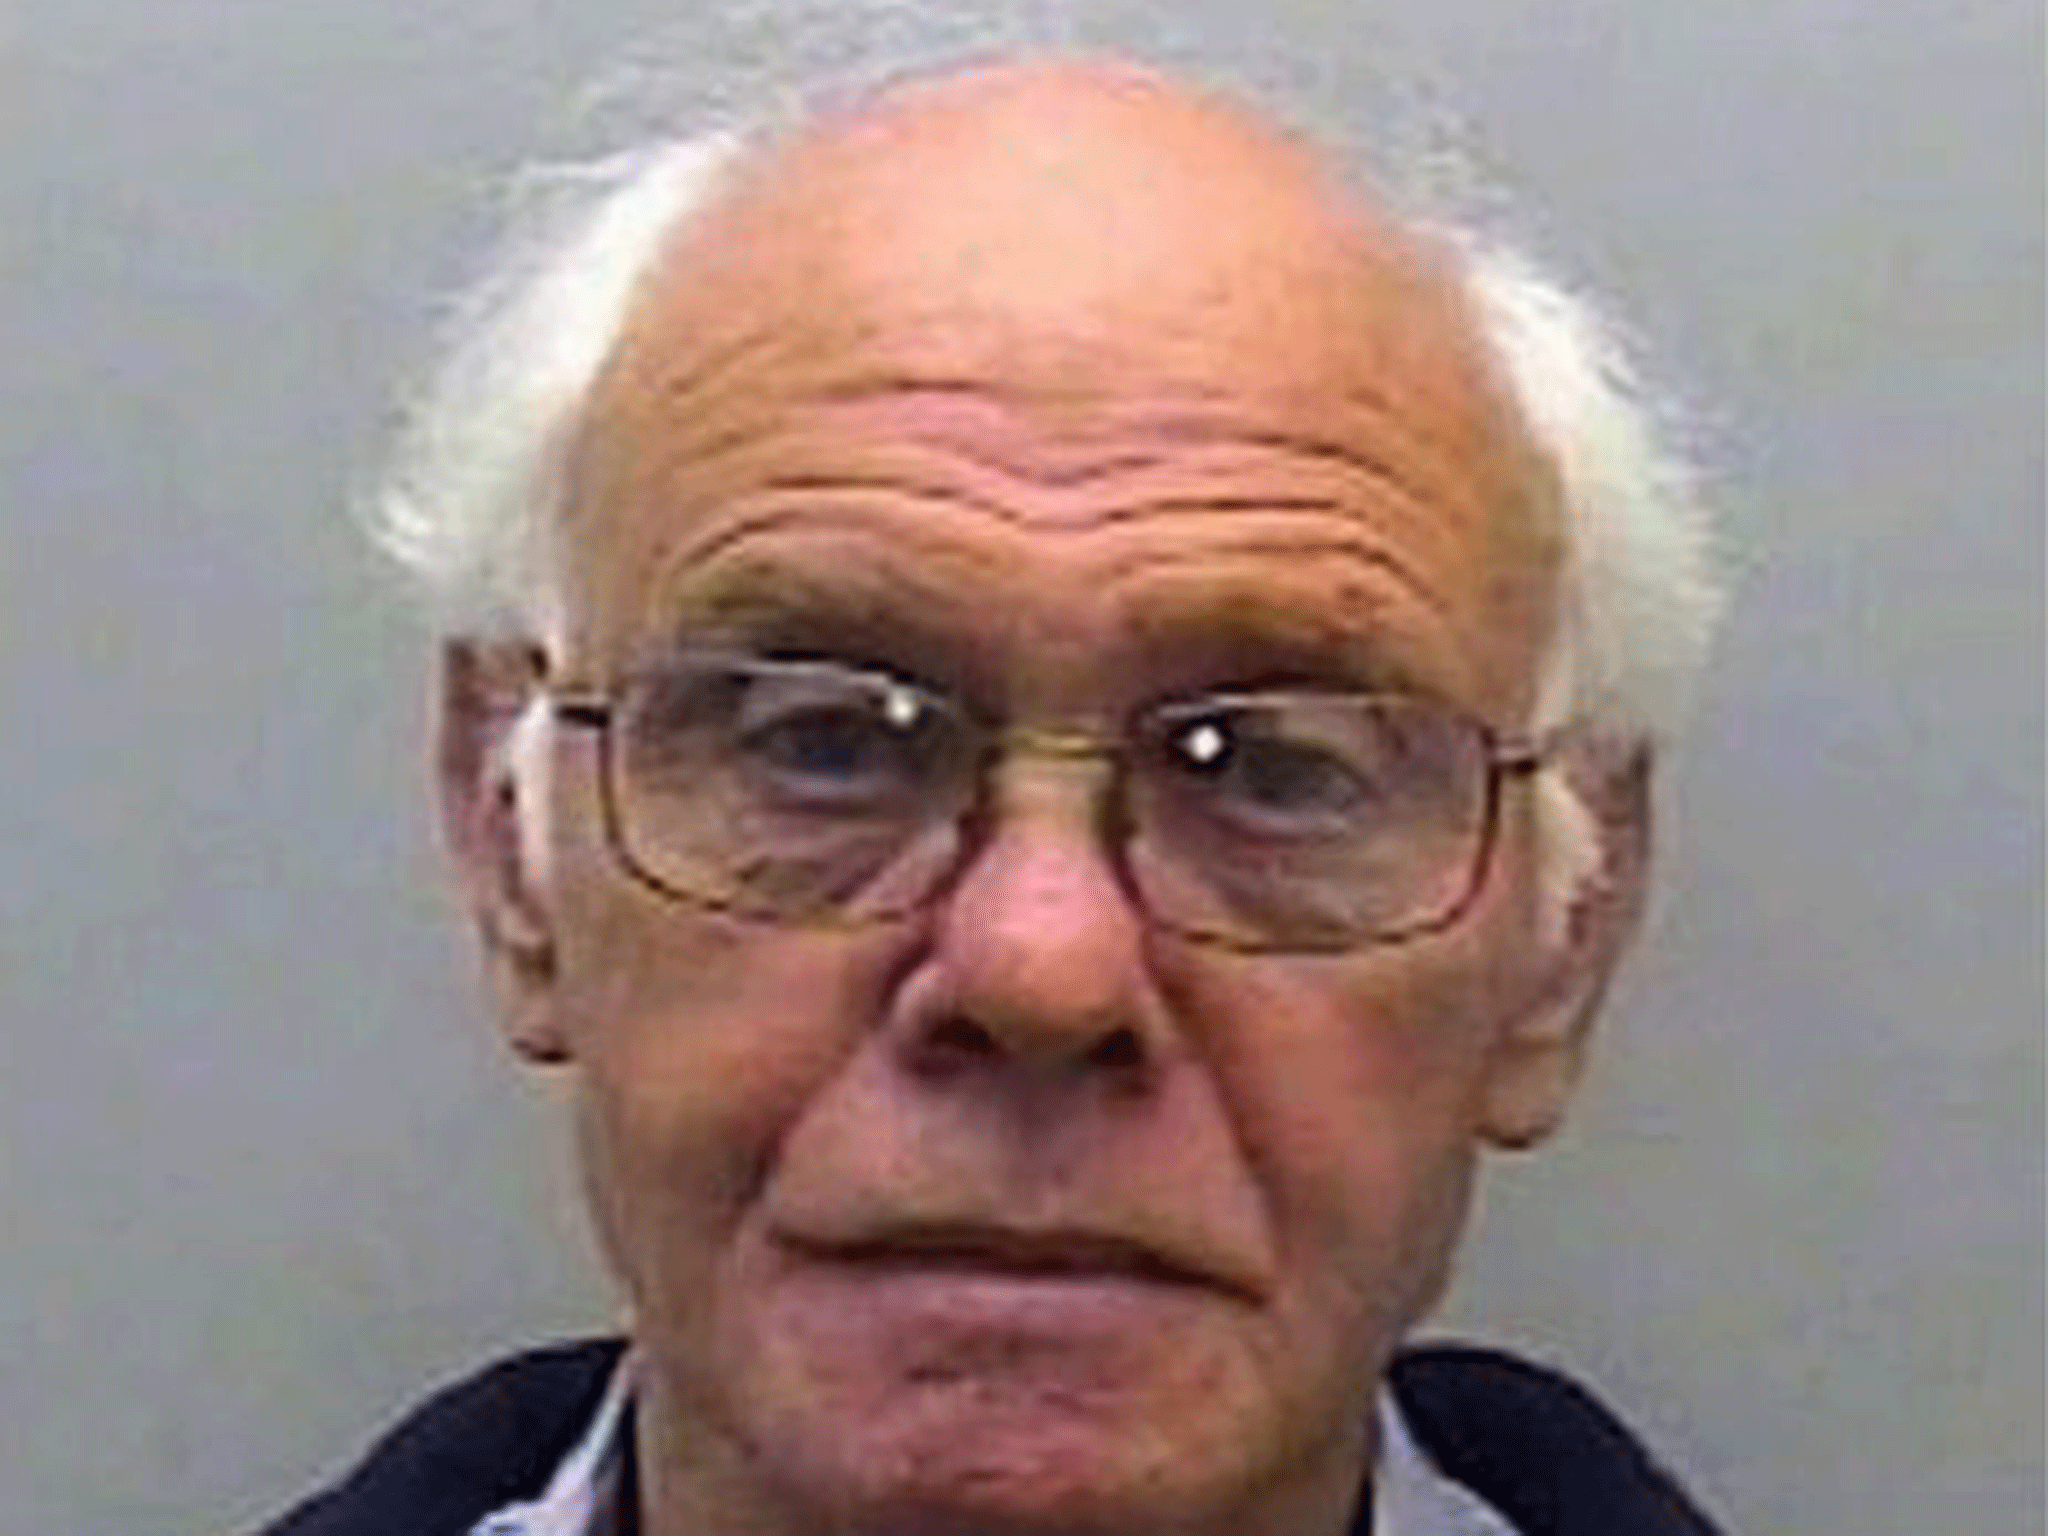 Roger Wakely, 73, was found guilty of 27 non-recent counts of sexual assault against four victims